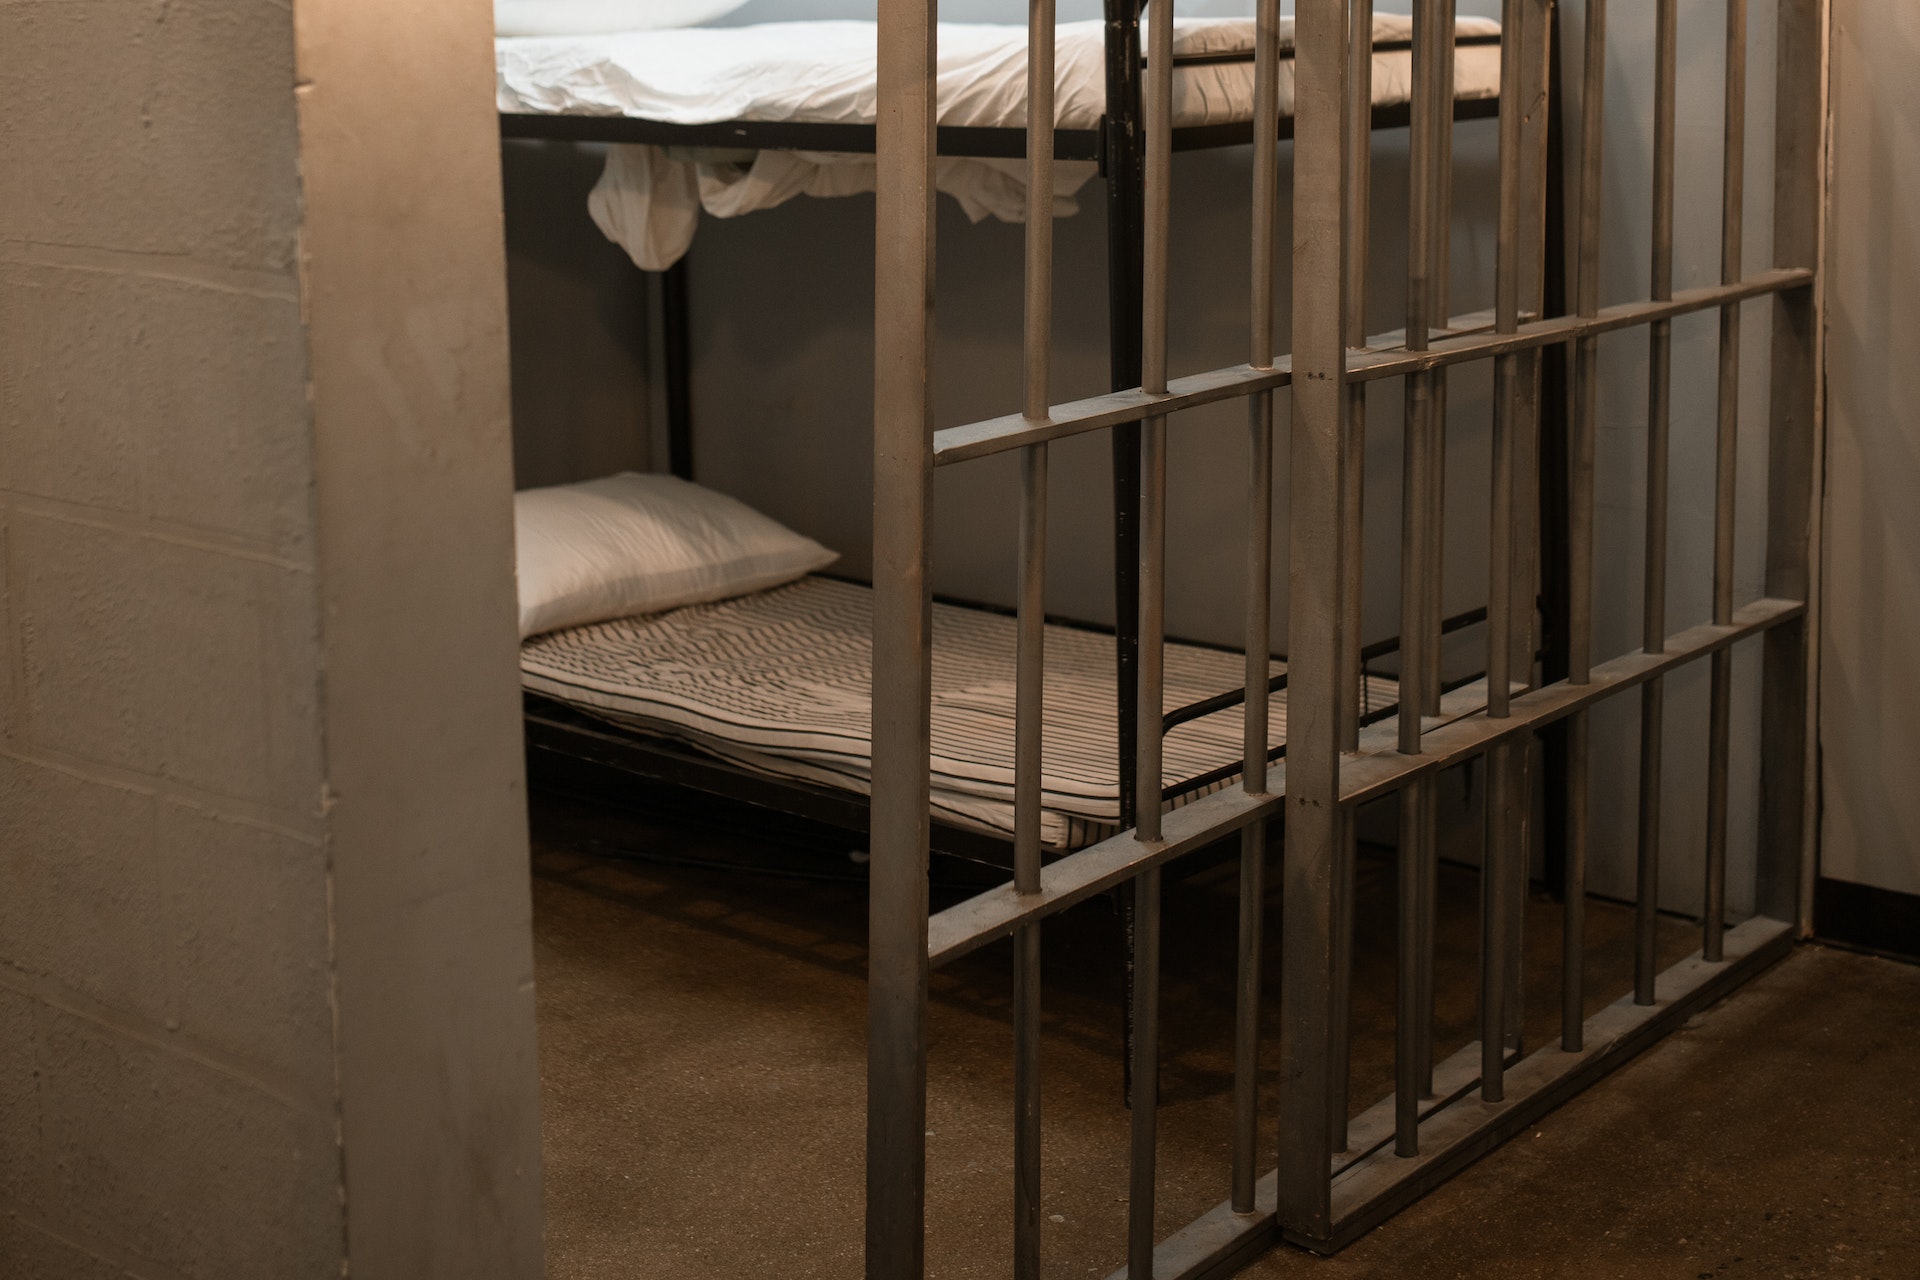 a bunk bed in a jail cell